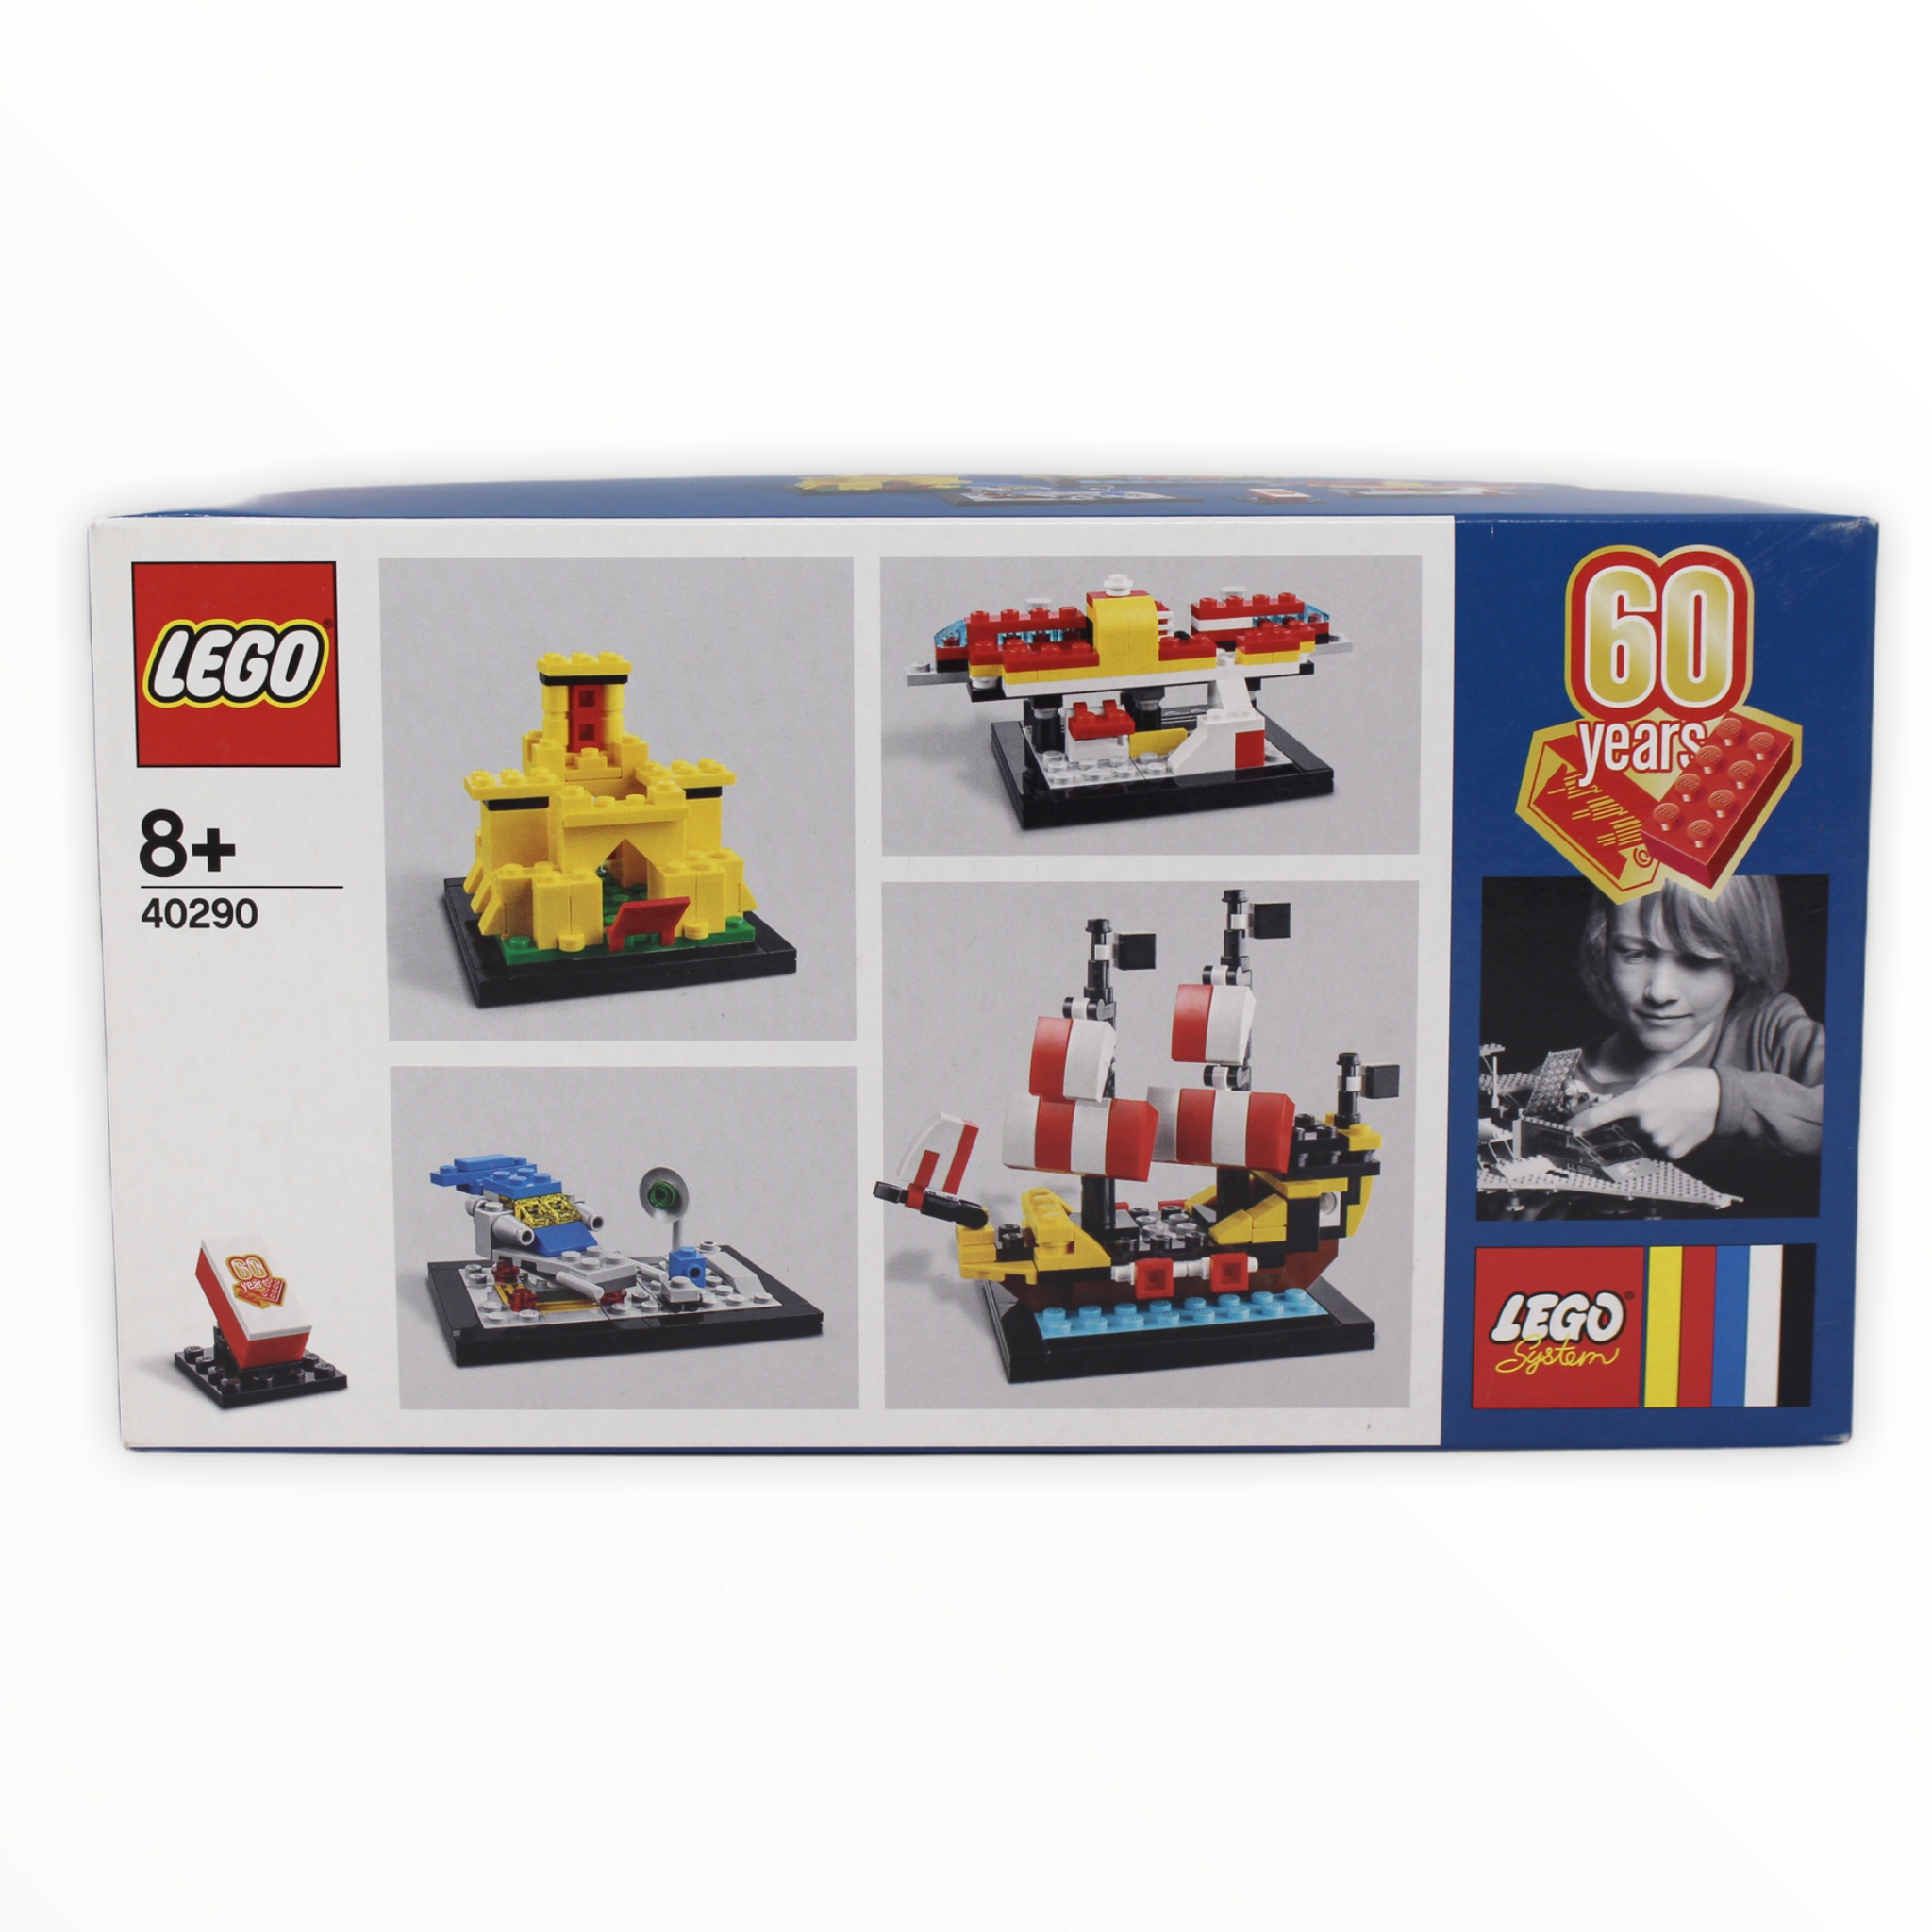 Retired Set 40290 60 Years of the LEGO Brick